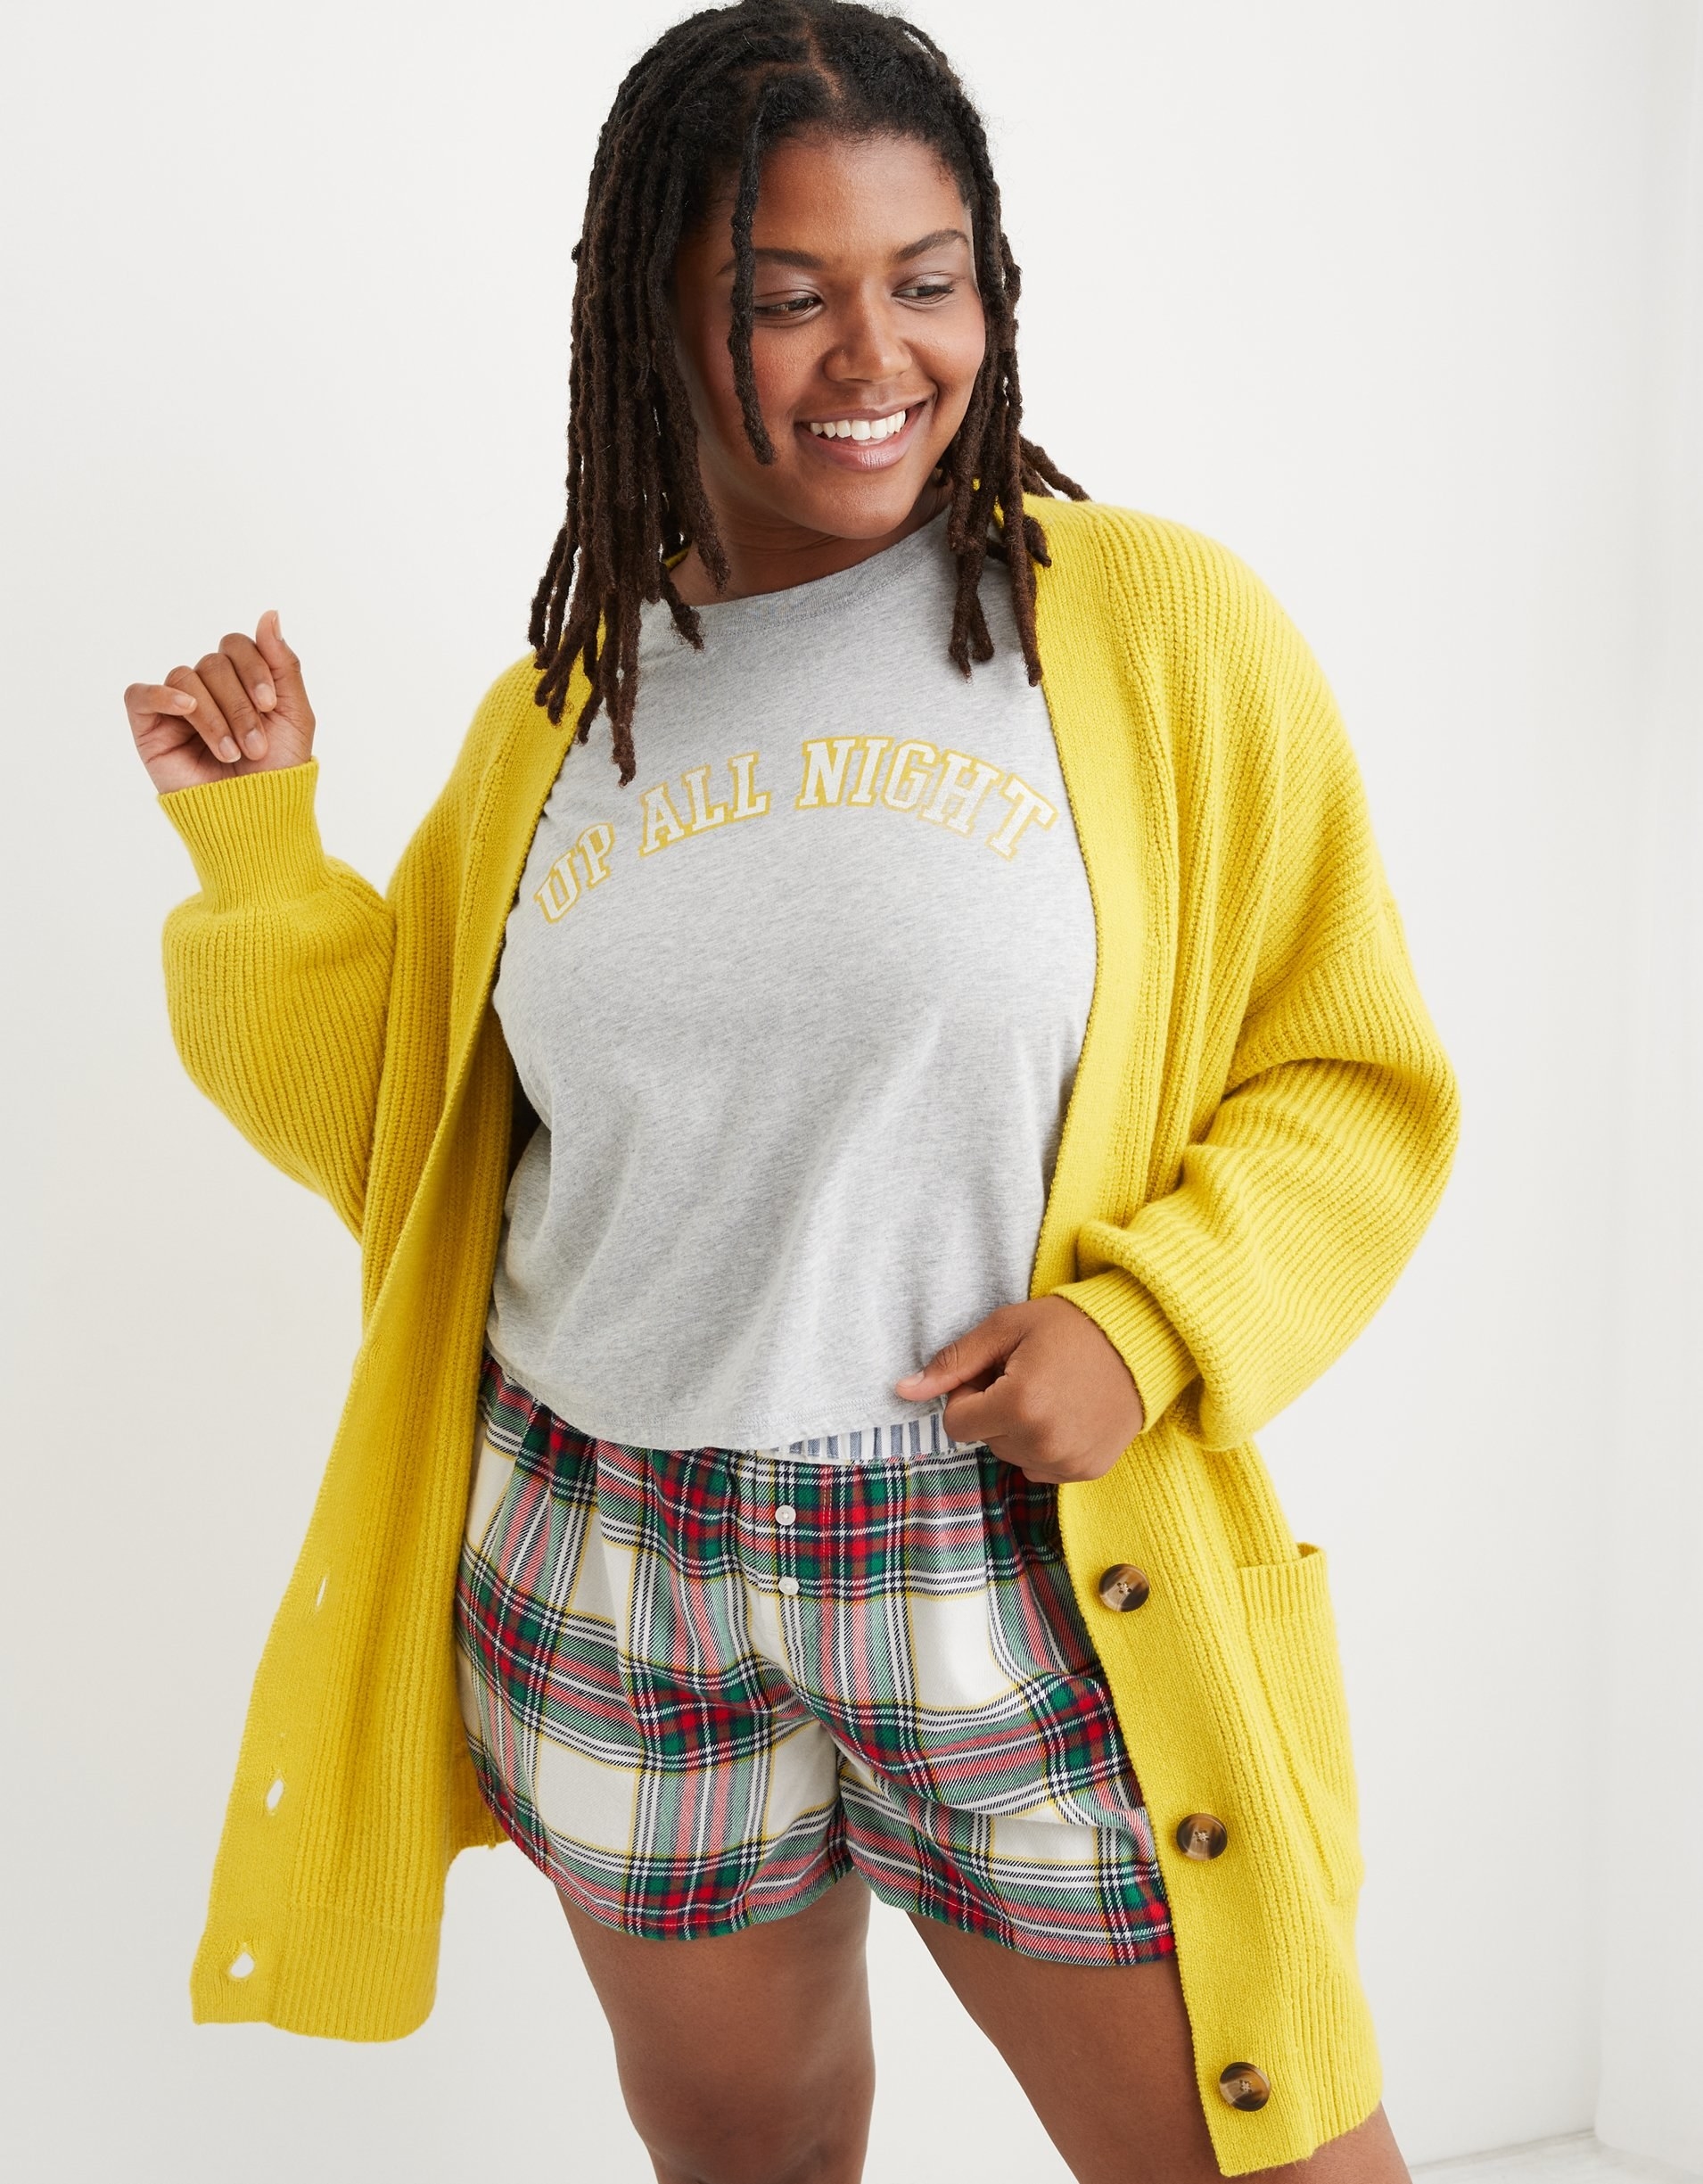 model in a bright yellow long knit cardigan with tortoise shell buttons